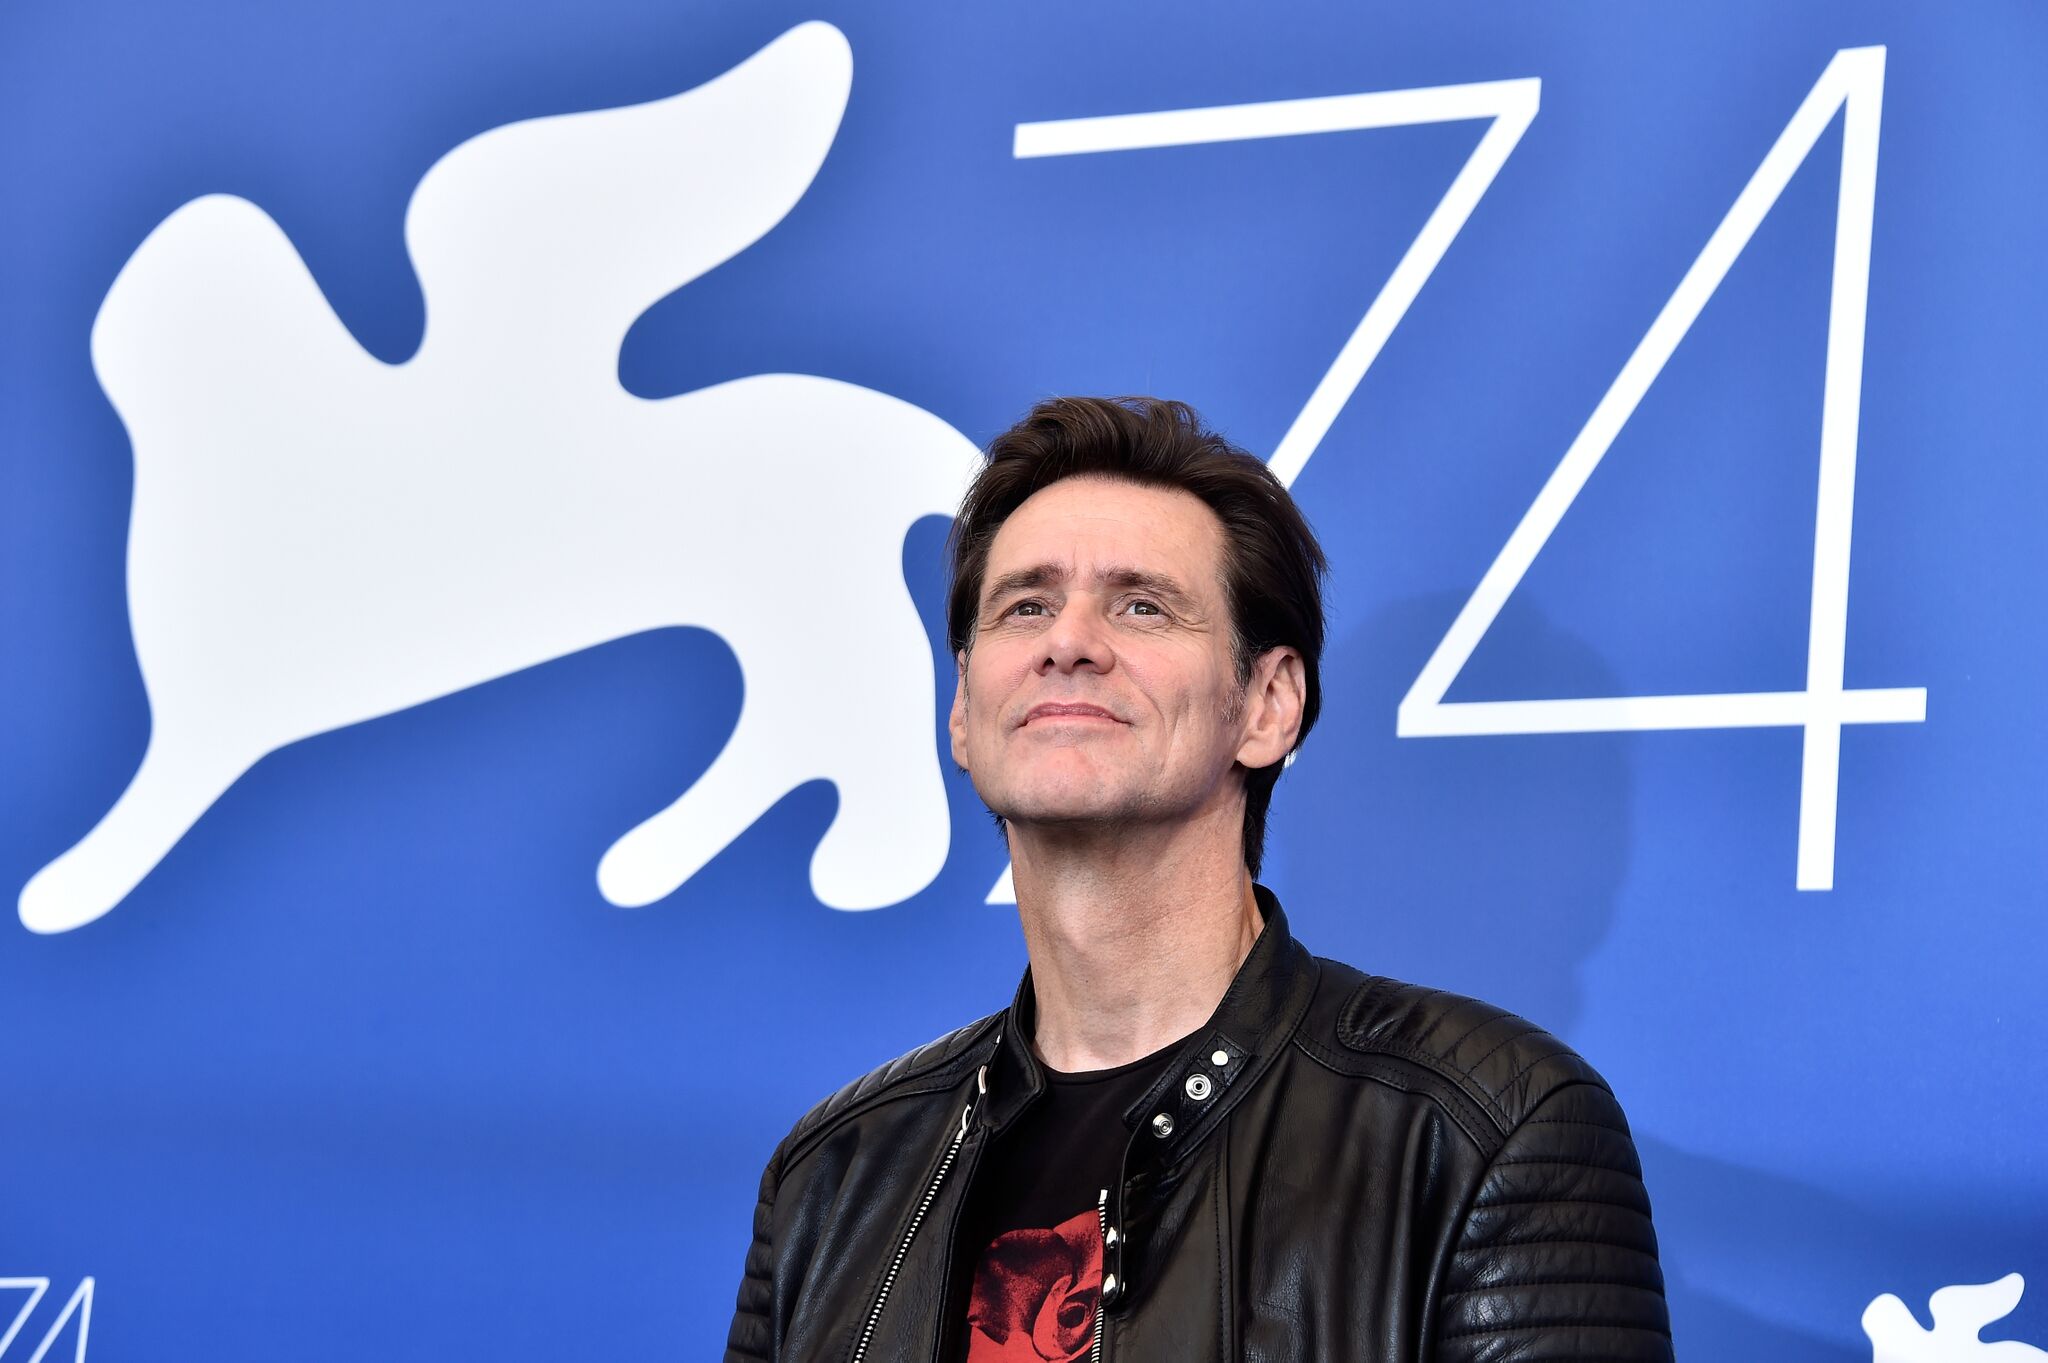 Jim Carrey attends the "Jim & Andy: The Great Beyond - The Story Of Jim Carrey & Andy Kaufman With A Very Special, Contractually Obligated Mention Of Tony Clifton" photocall  | Getty Images